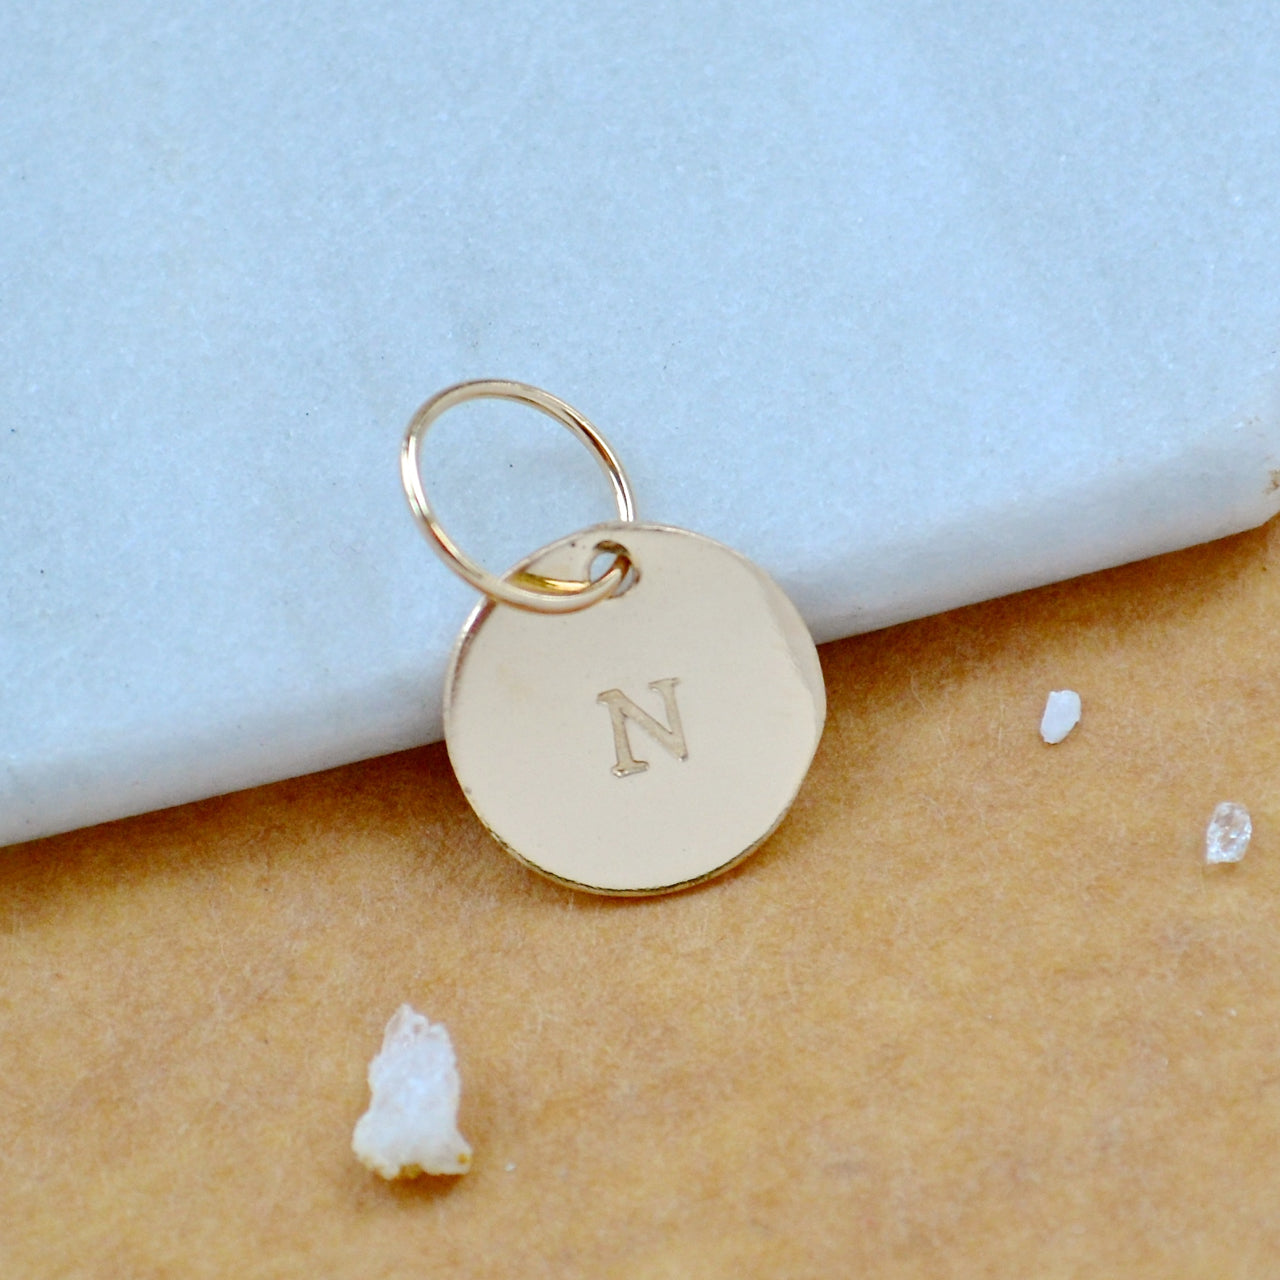 LETTER CHARM, capital N initial charms, handmade alphabet circle charm, N letter pendant, simple jewelry, delicate handmade charms, nickel-free jewelry, gold letter charm